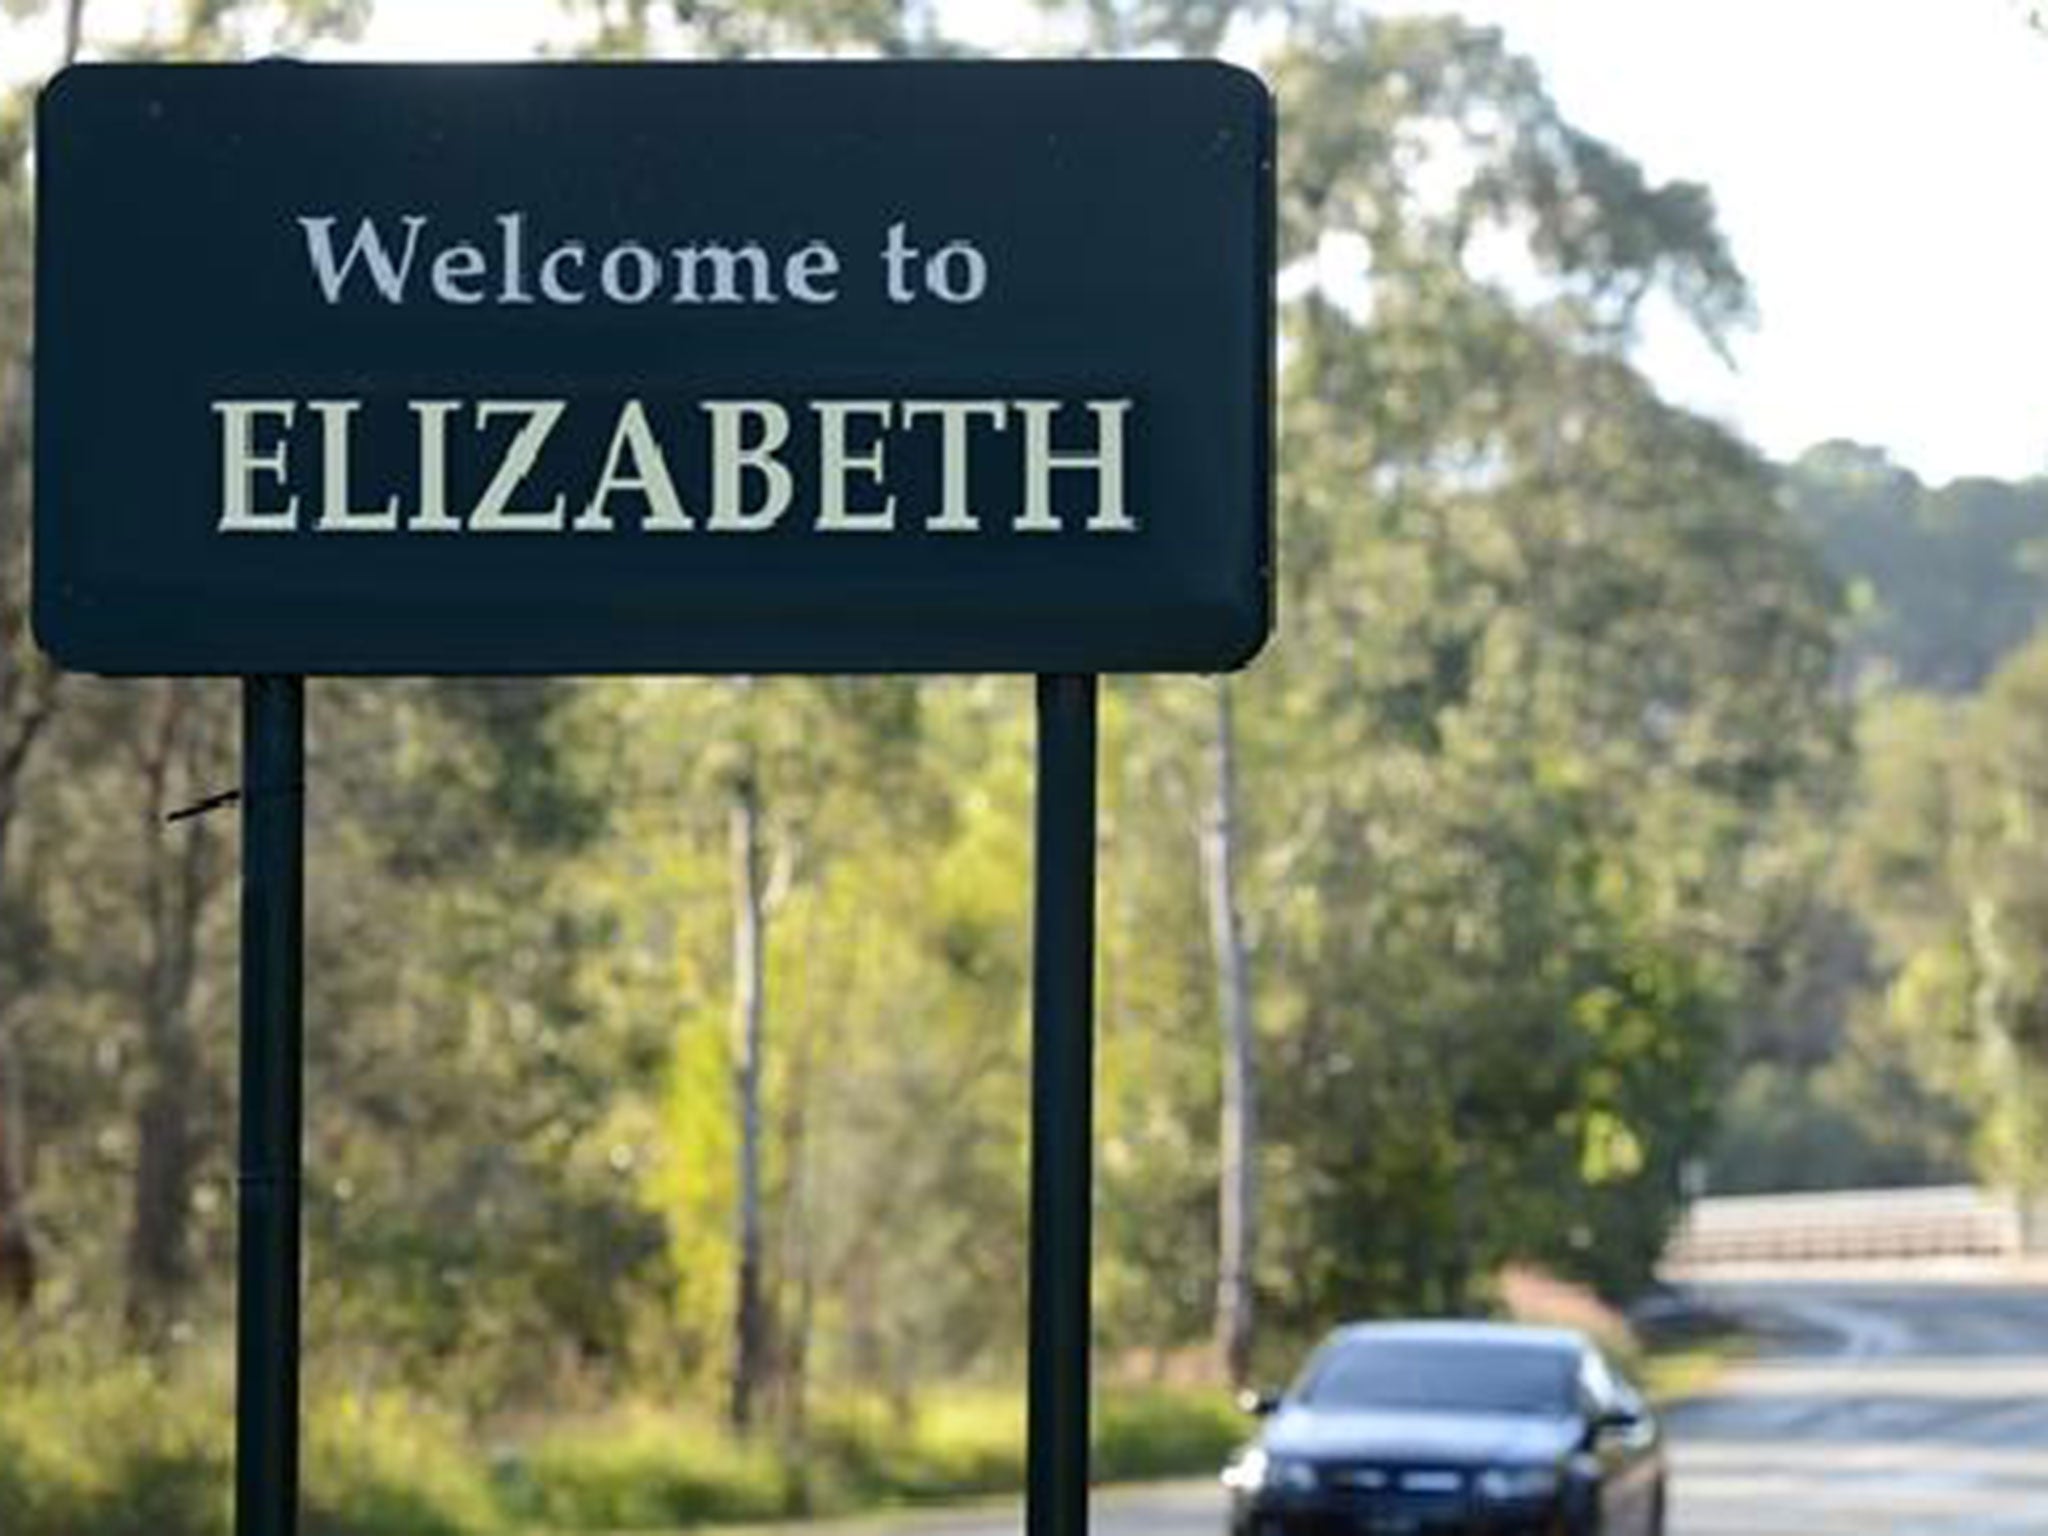 The state of Elizabeth, as imagined by news.com.au